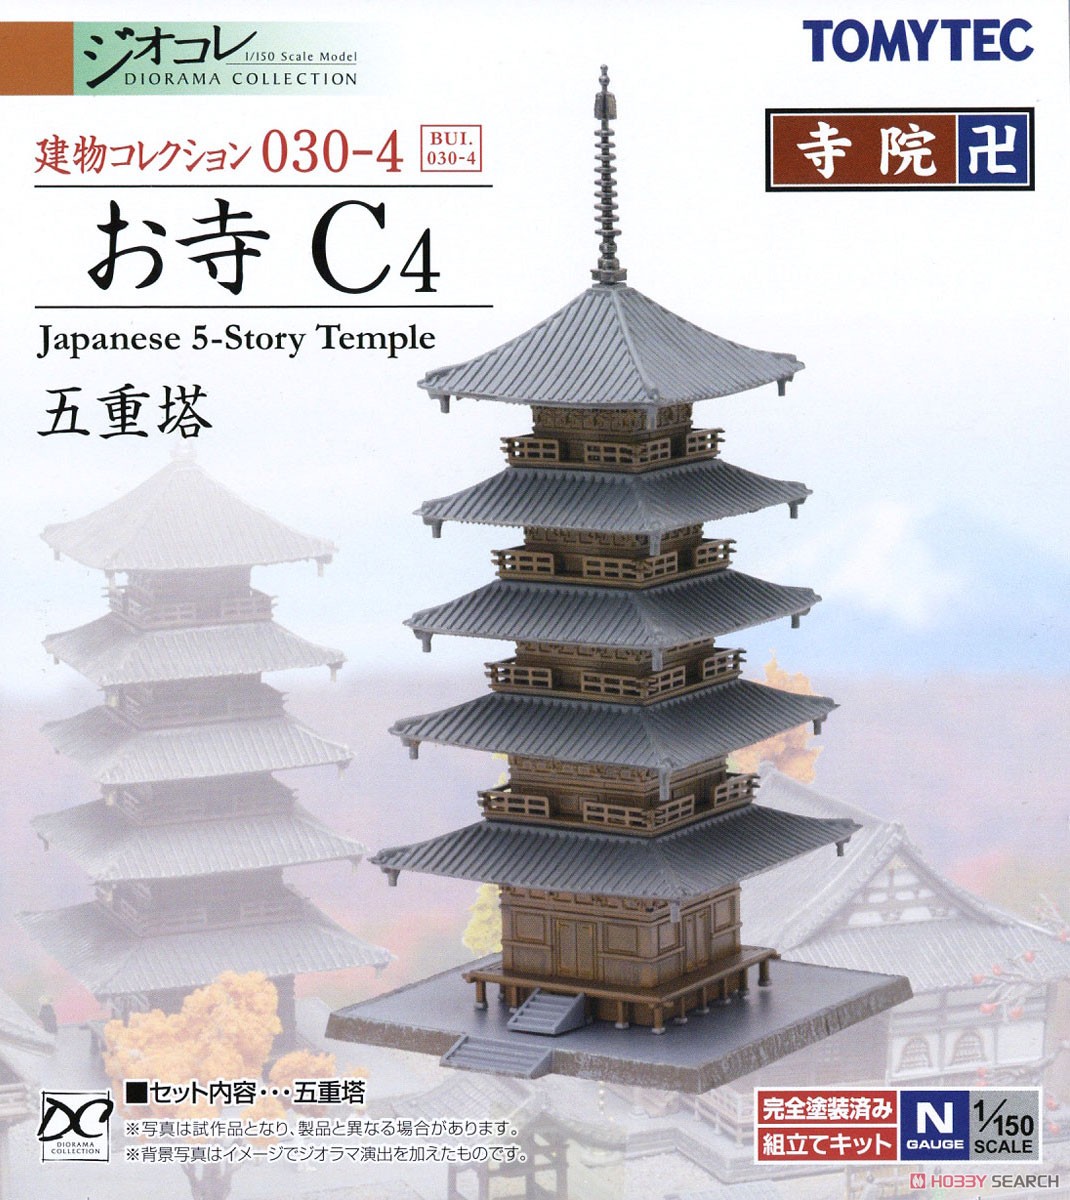 The Building Collection 030-4 Japanese Temple C4 (Five-story Stupa) (Model Train) Package1